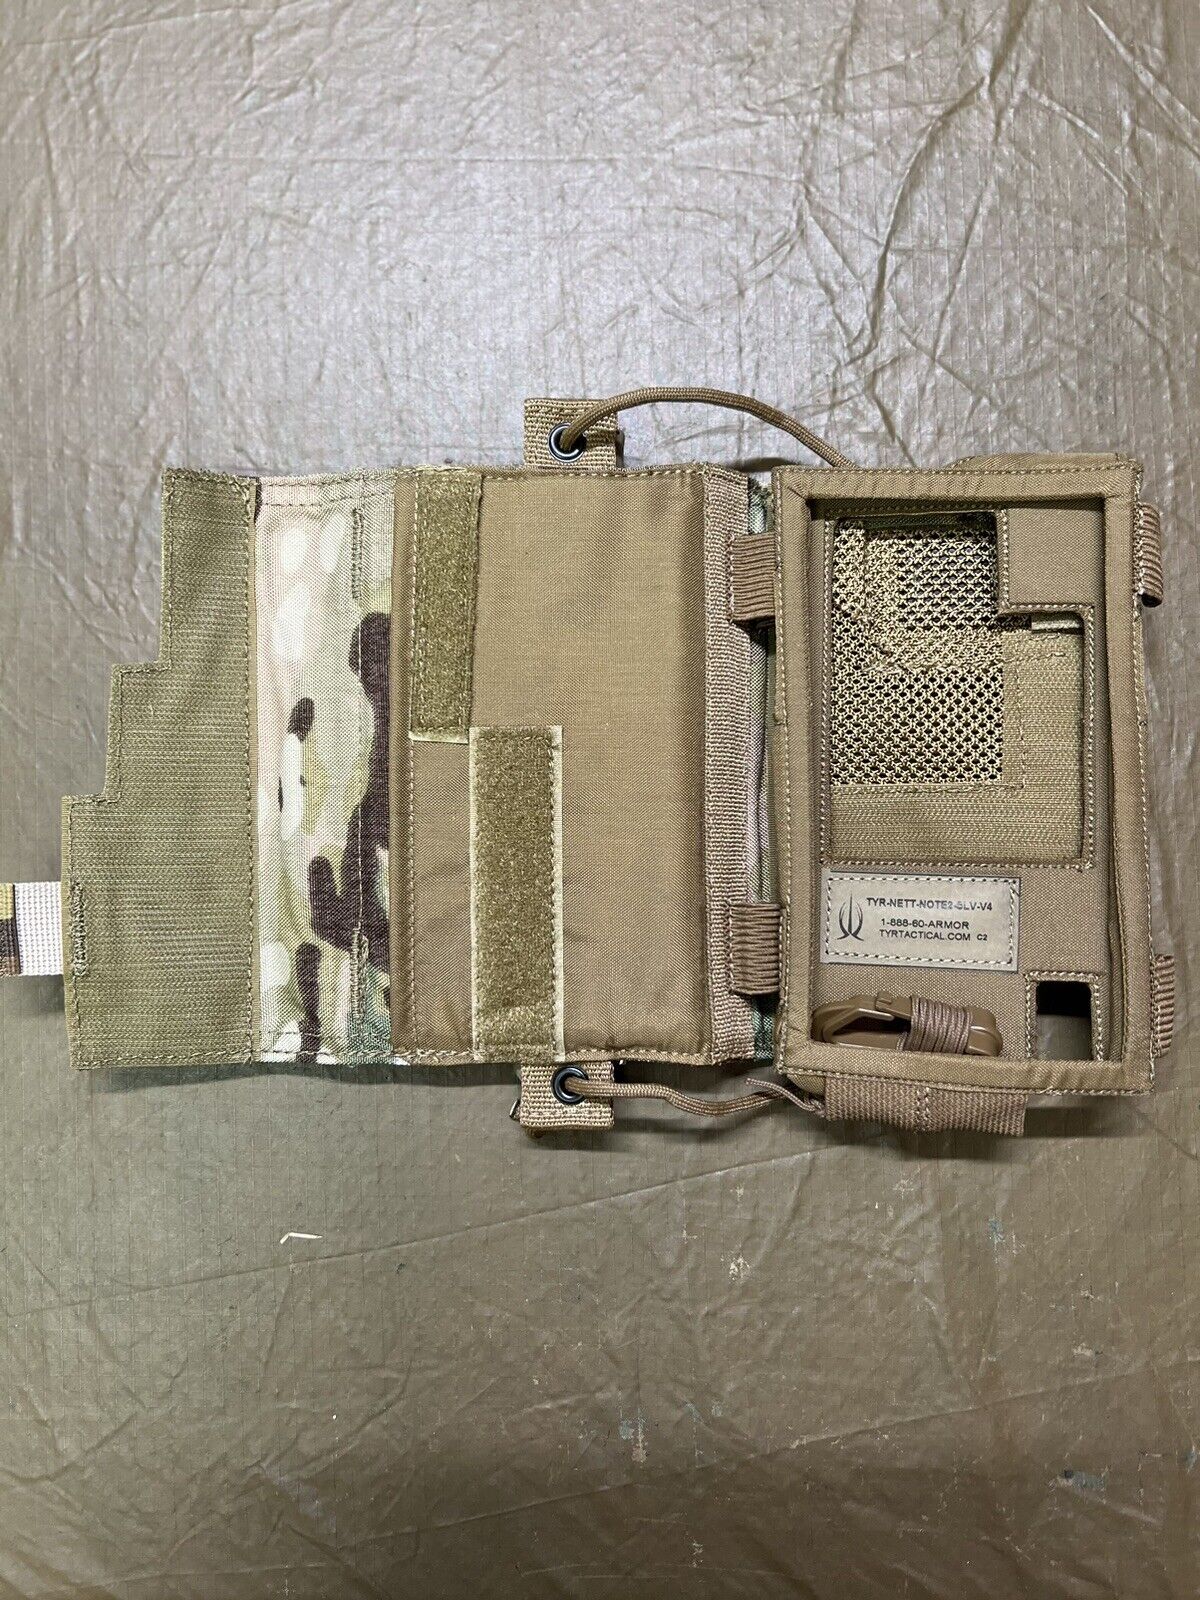 TYR TACTICAL MULTICAM PHONE POUCH SAMSUNG NOTE 2 V.4 END USER DEVICE W/SLEEVE